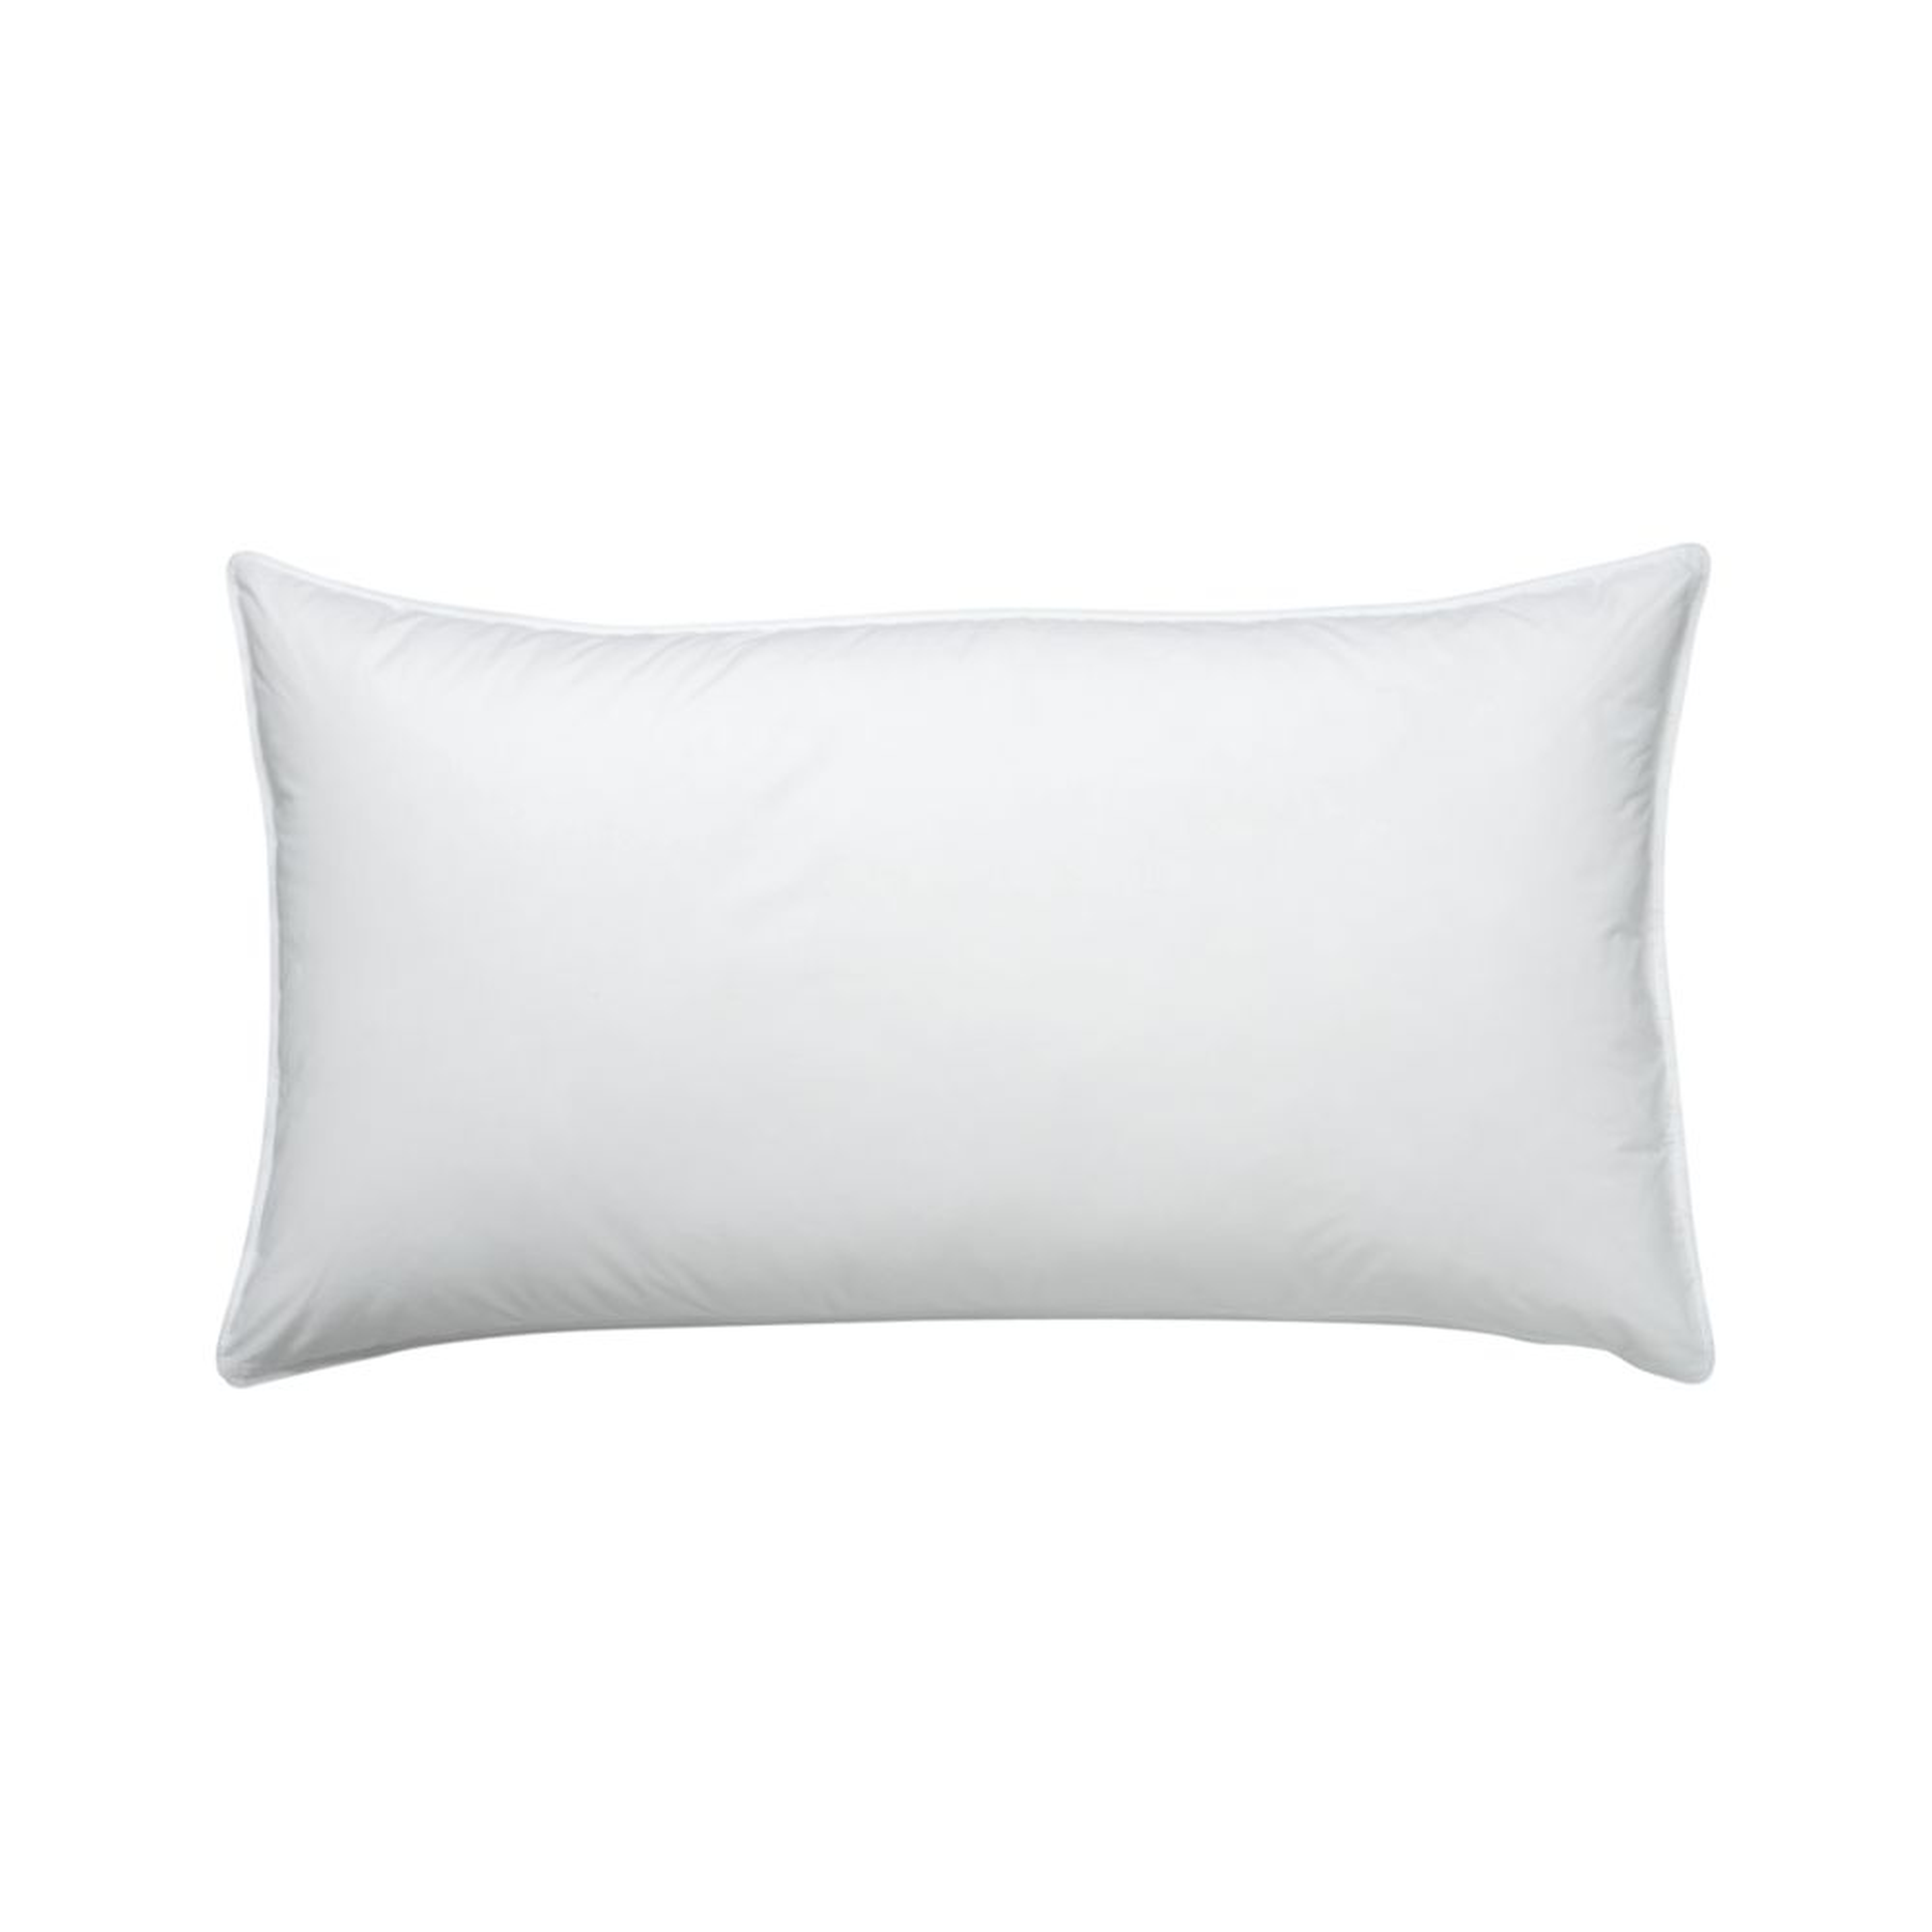 Feather-Down King Pillow - Crate and Barrel